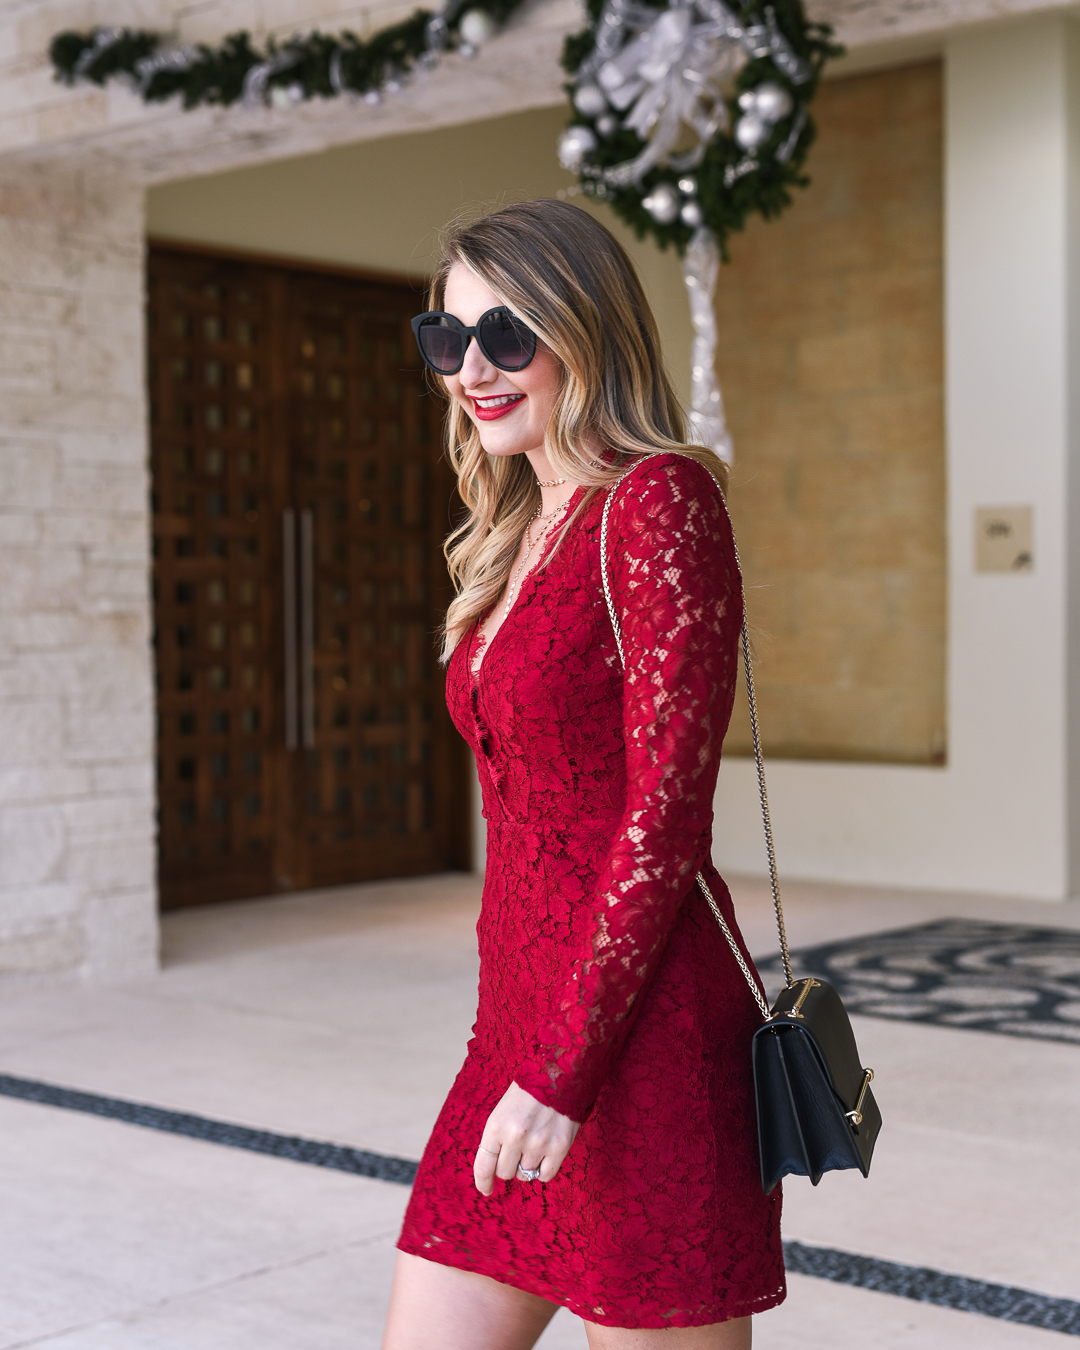 long sleeve deep red lace dress from nordstrom - Red WAYF Dress by Chicago fashion blogger Visions of Vogue